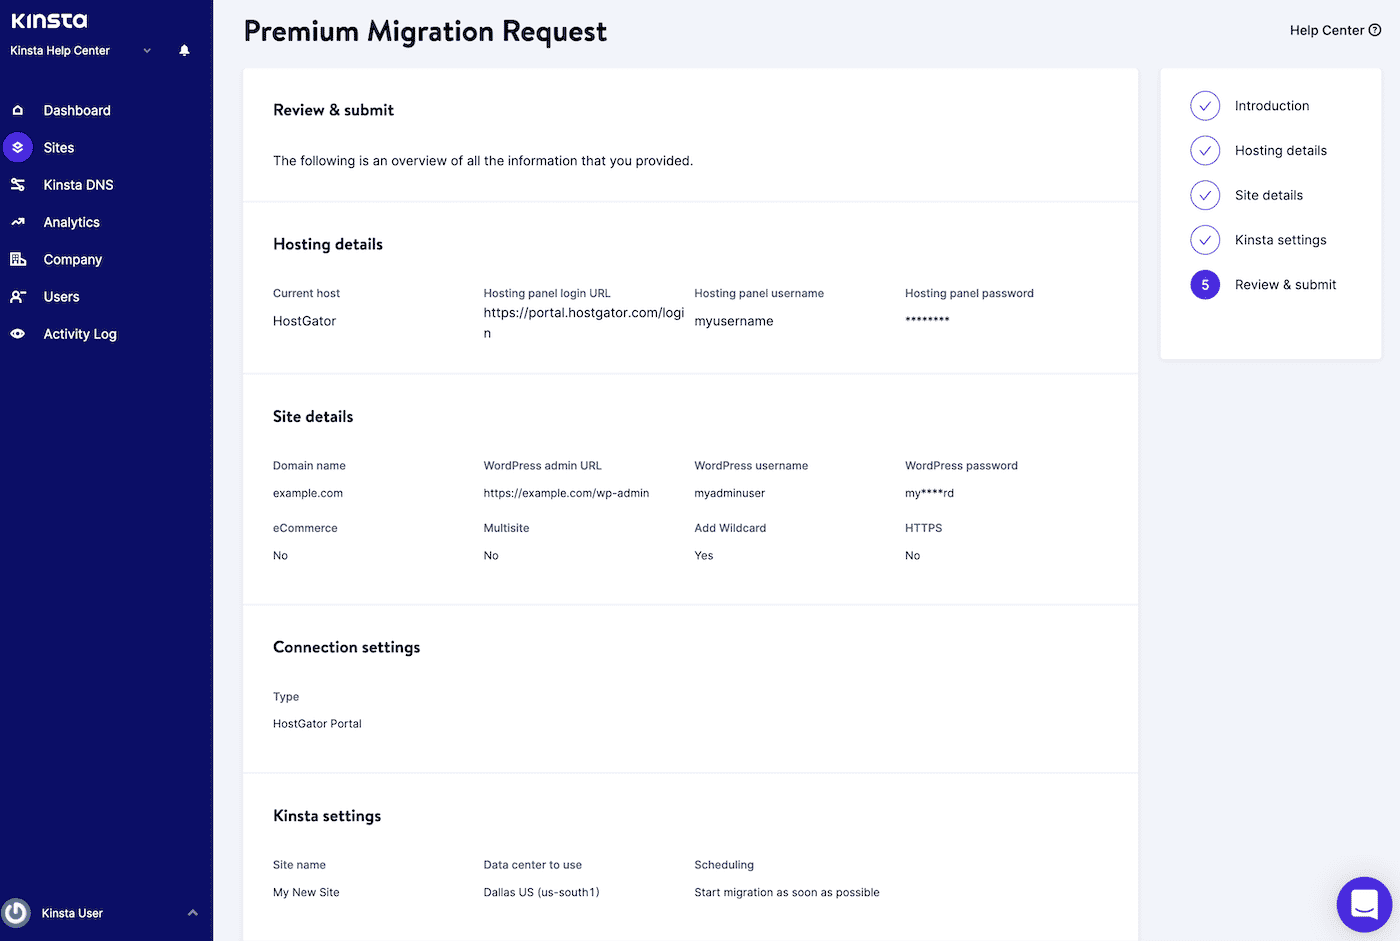 Review and submit your premium migration request.